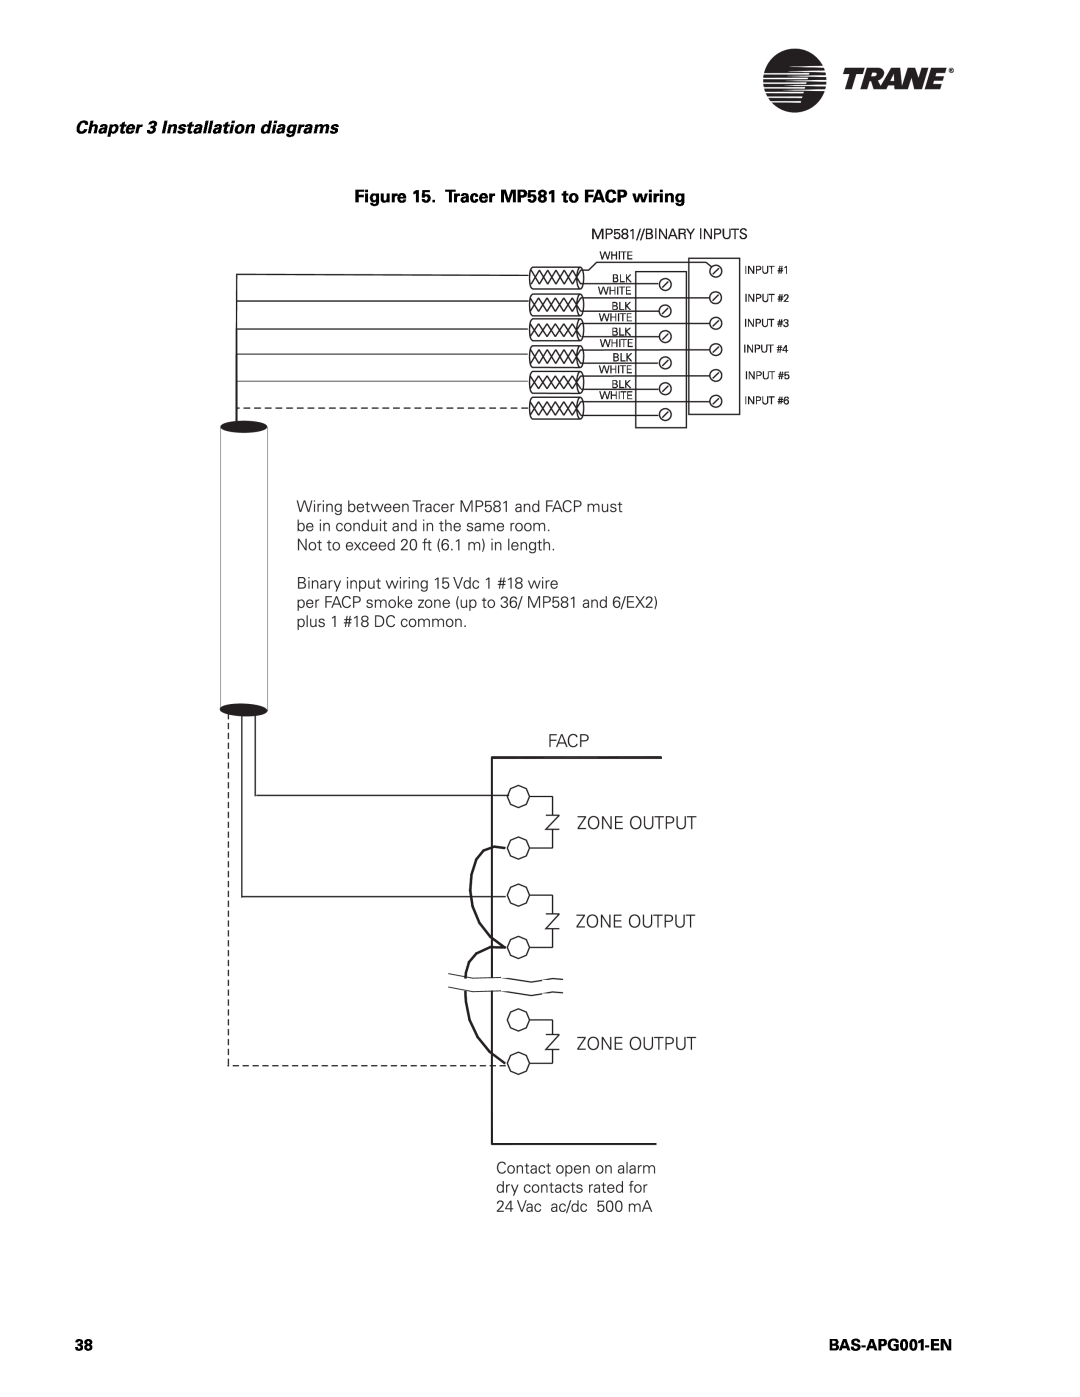 Trane BAS-APG001-EN, Engineered Smoke Control System for Tracer Summit Installation diagrams, Tracer MP581 to FACP wiring 